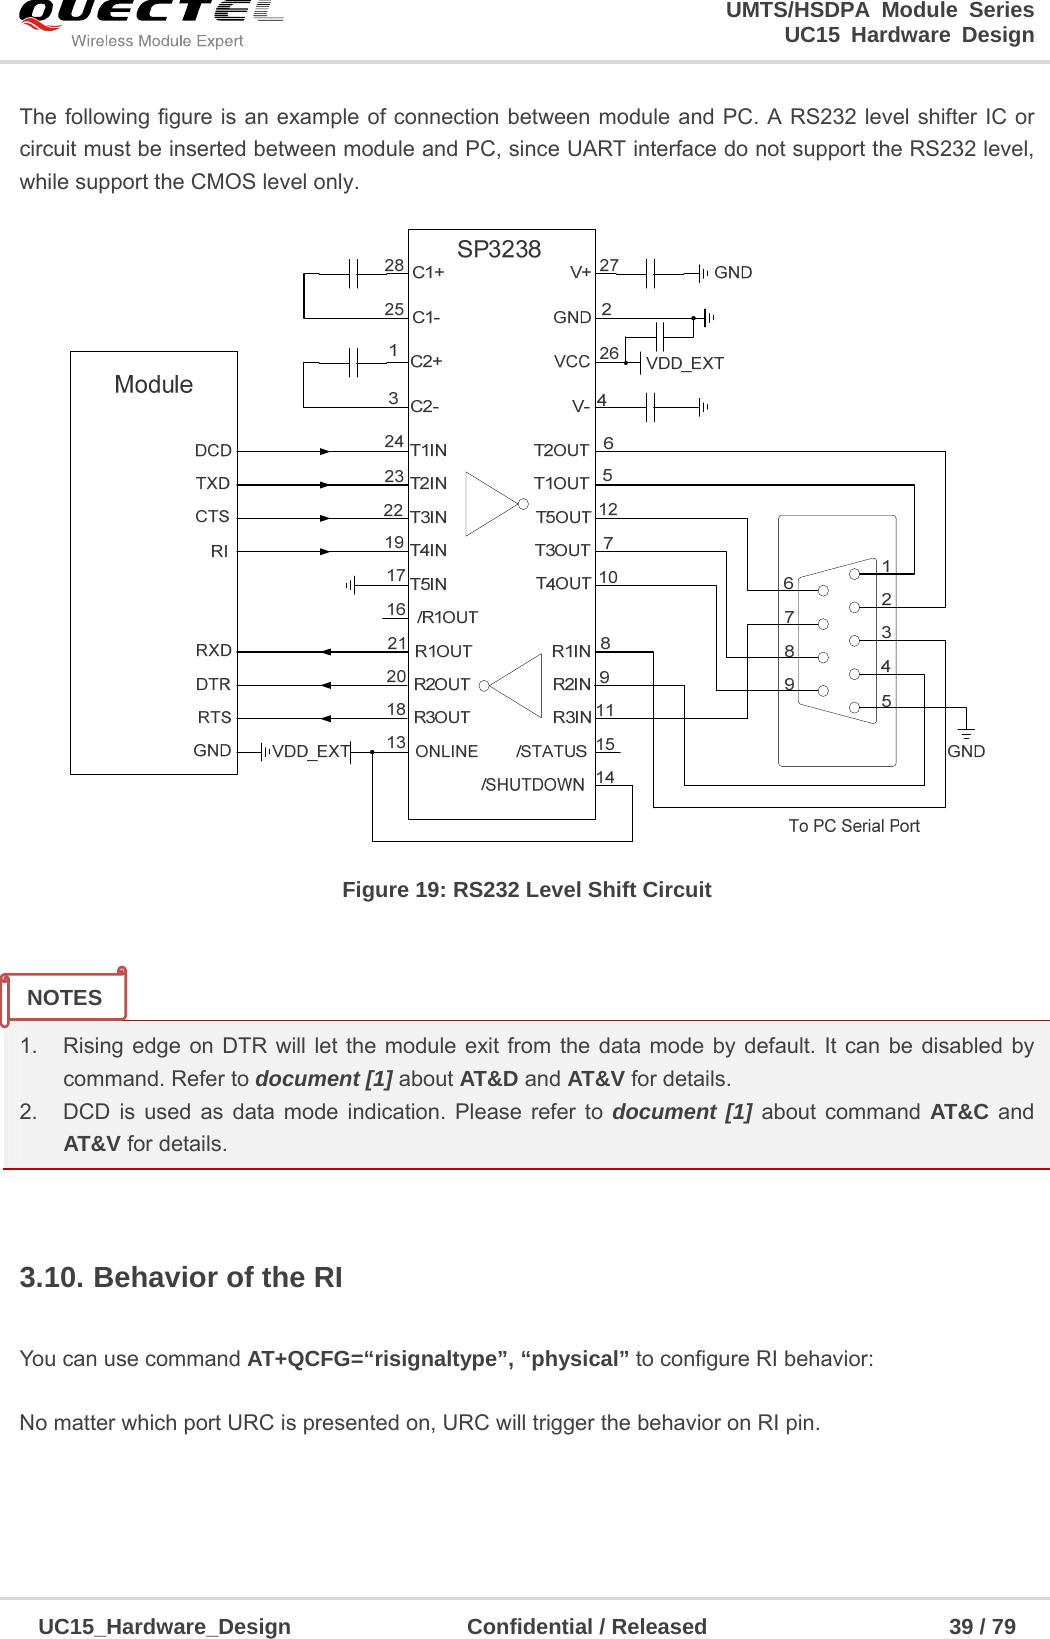                                                                        UMTS/HSDPA Module Series                                                                 UC15 Hardware Design  UC15_Hardware_Design                Confidential / Released                      39 / 79    The following figure is an example of connection between module and PC. A RS232 level shifter IC or circuit must be inserted between module and PC, since UART interface do not support the RS232 level, while support the CMOS level only.    Figure 19: RS232 Level Shift Circuit     1.  Rising edge on DTR will let the module exit from the data mode by default. It can be disabled by command. Refer to document [1] about AT&amp;D and AT&amp;V for details. 2.  DCD is used as data mode indication. Please refer to document [1] about command AT&amp;C and AT&amp;V for details.  3.10. Behavior of the RI  You can use command AT+QCFG=“risignaltype”, “physical” to configure RI behavior:  No matter which port URC is presented on, URC will trigger the behavior on RI pin.    NOTES 